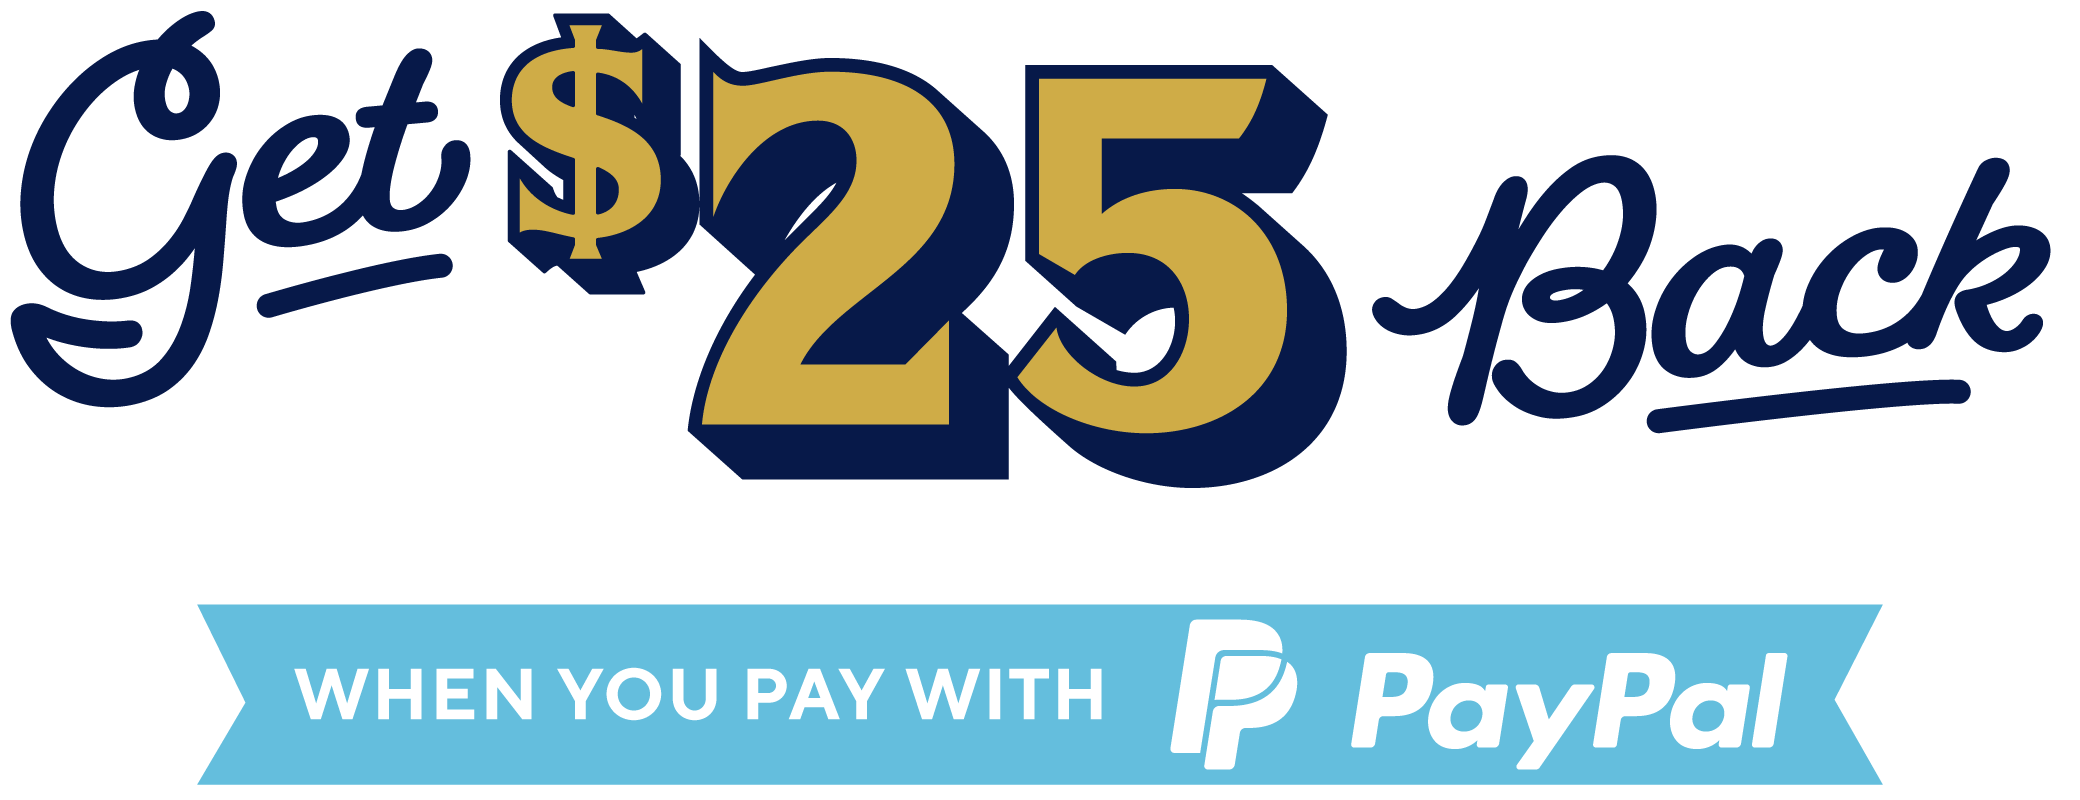 25 by 25 We Accept PayPal Logo - PayPal x Innings – Innings Festival